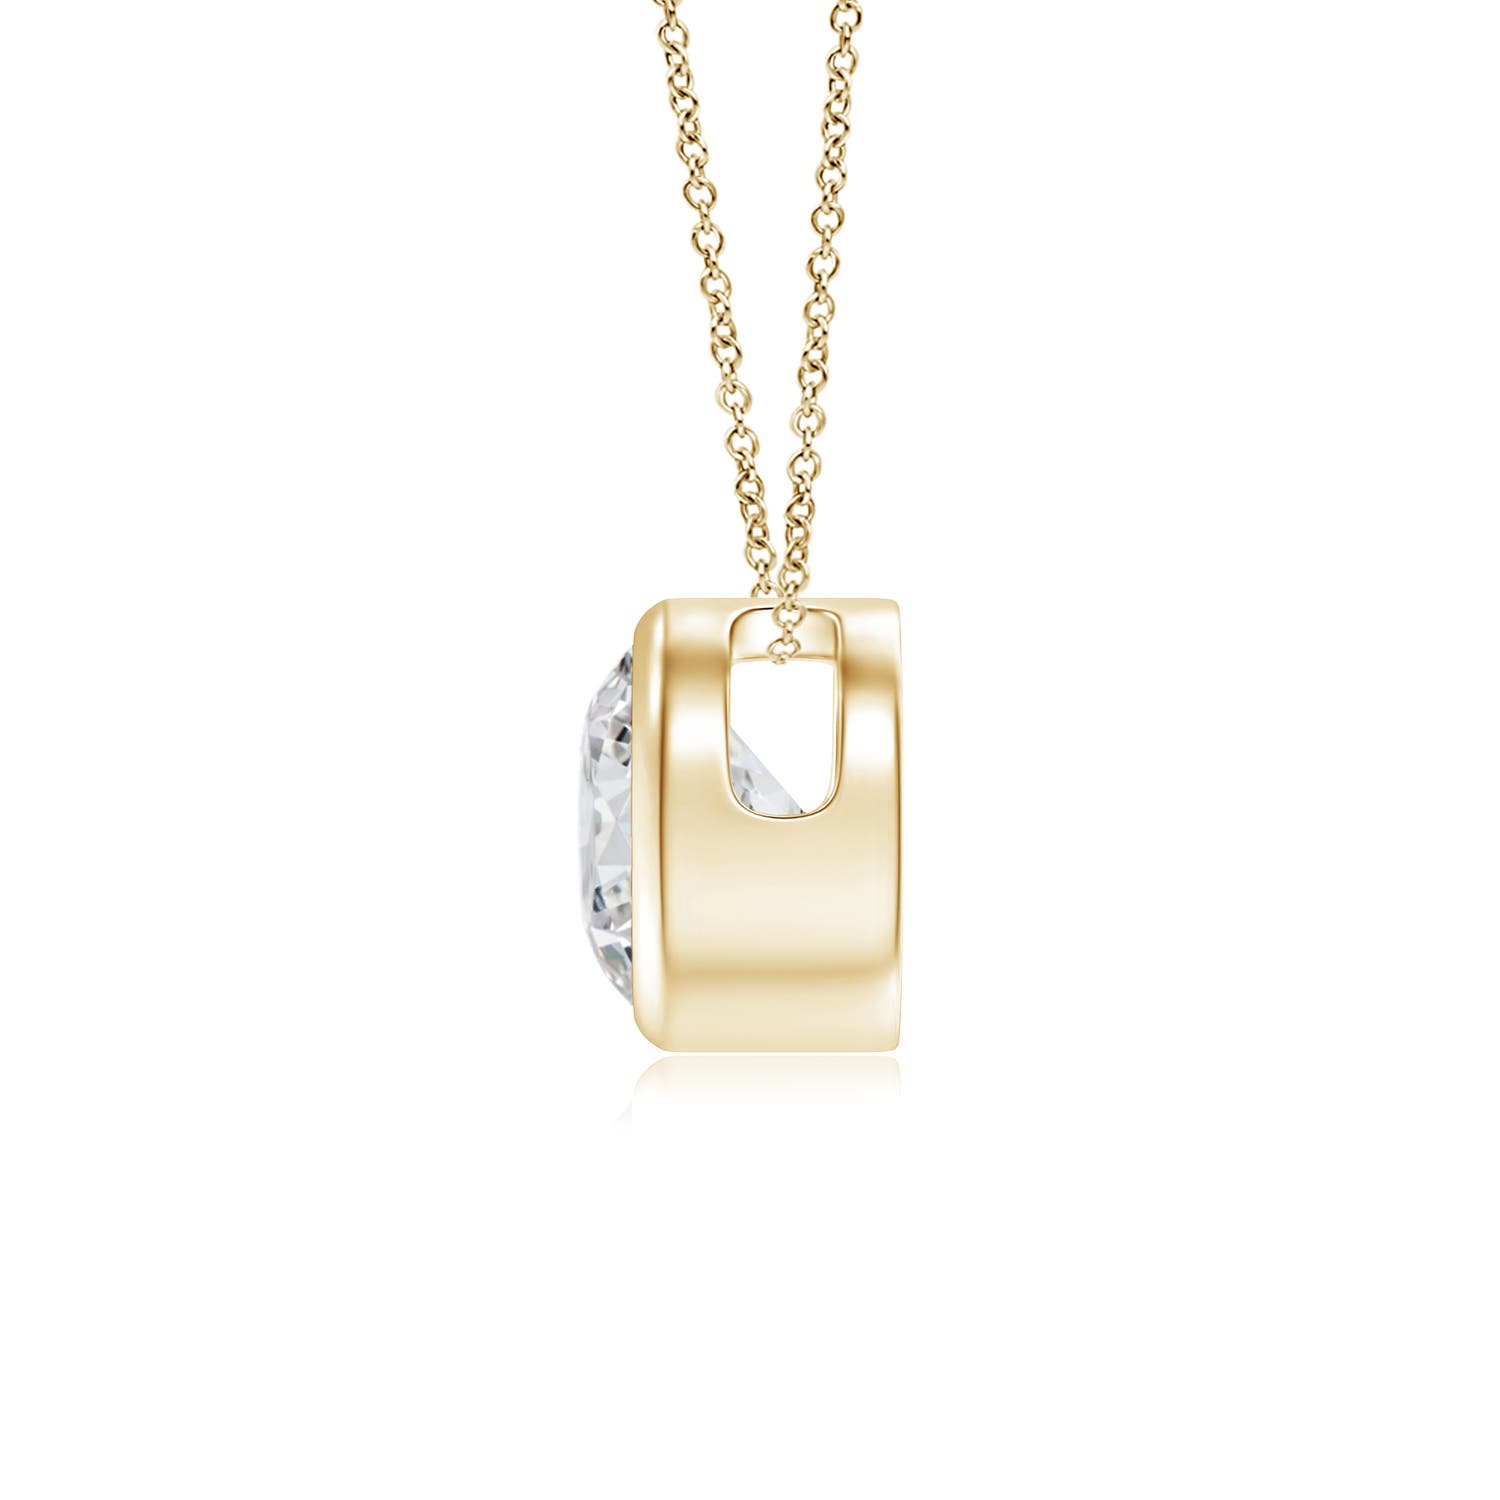 H, SI2 / 1.25 CT / 14 KT Yellow Gold